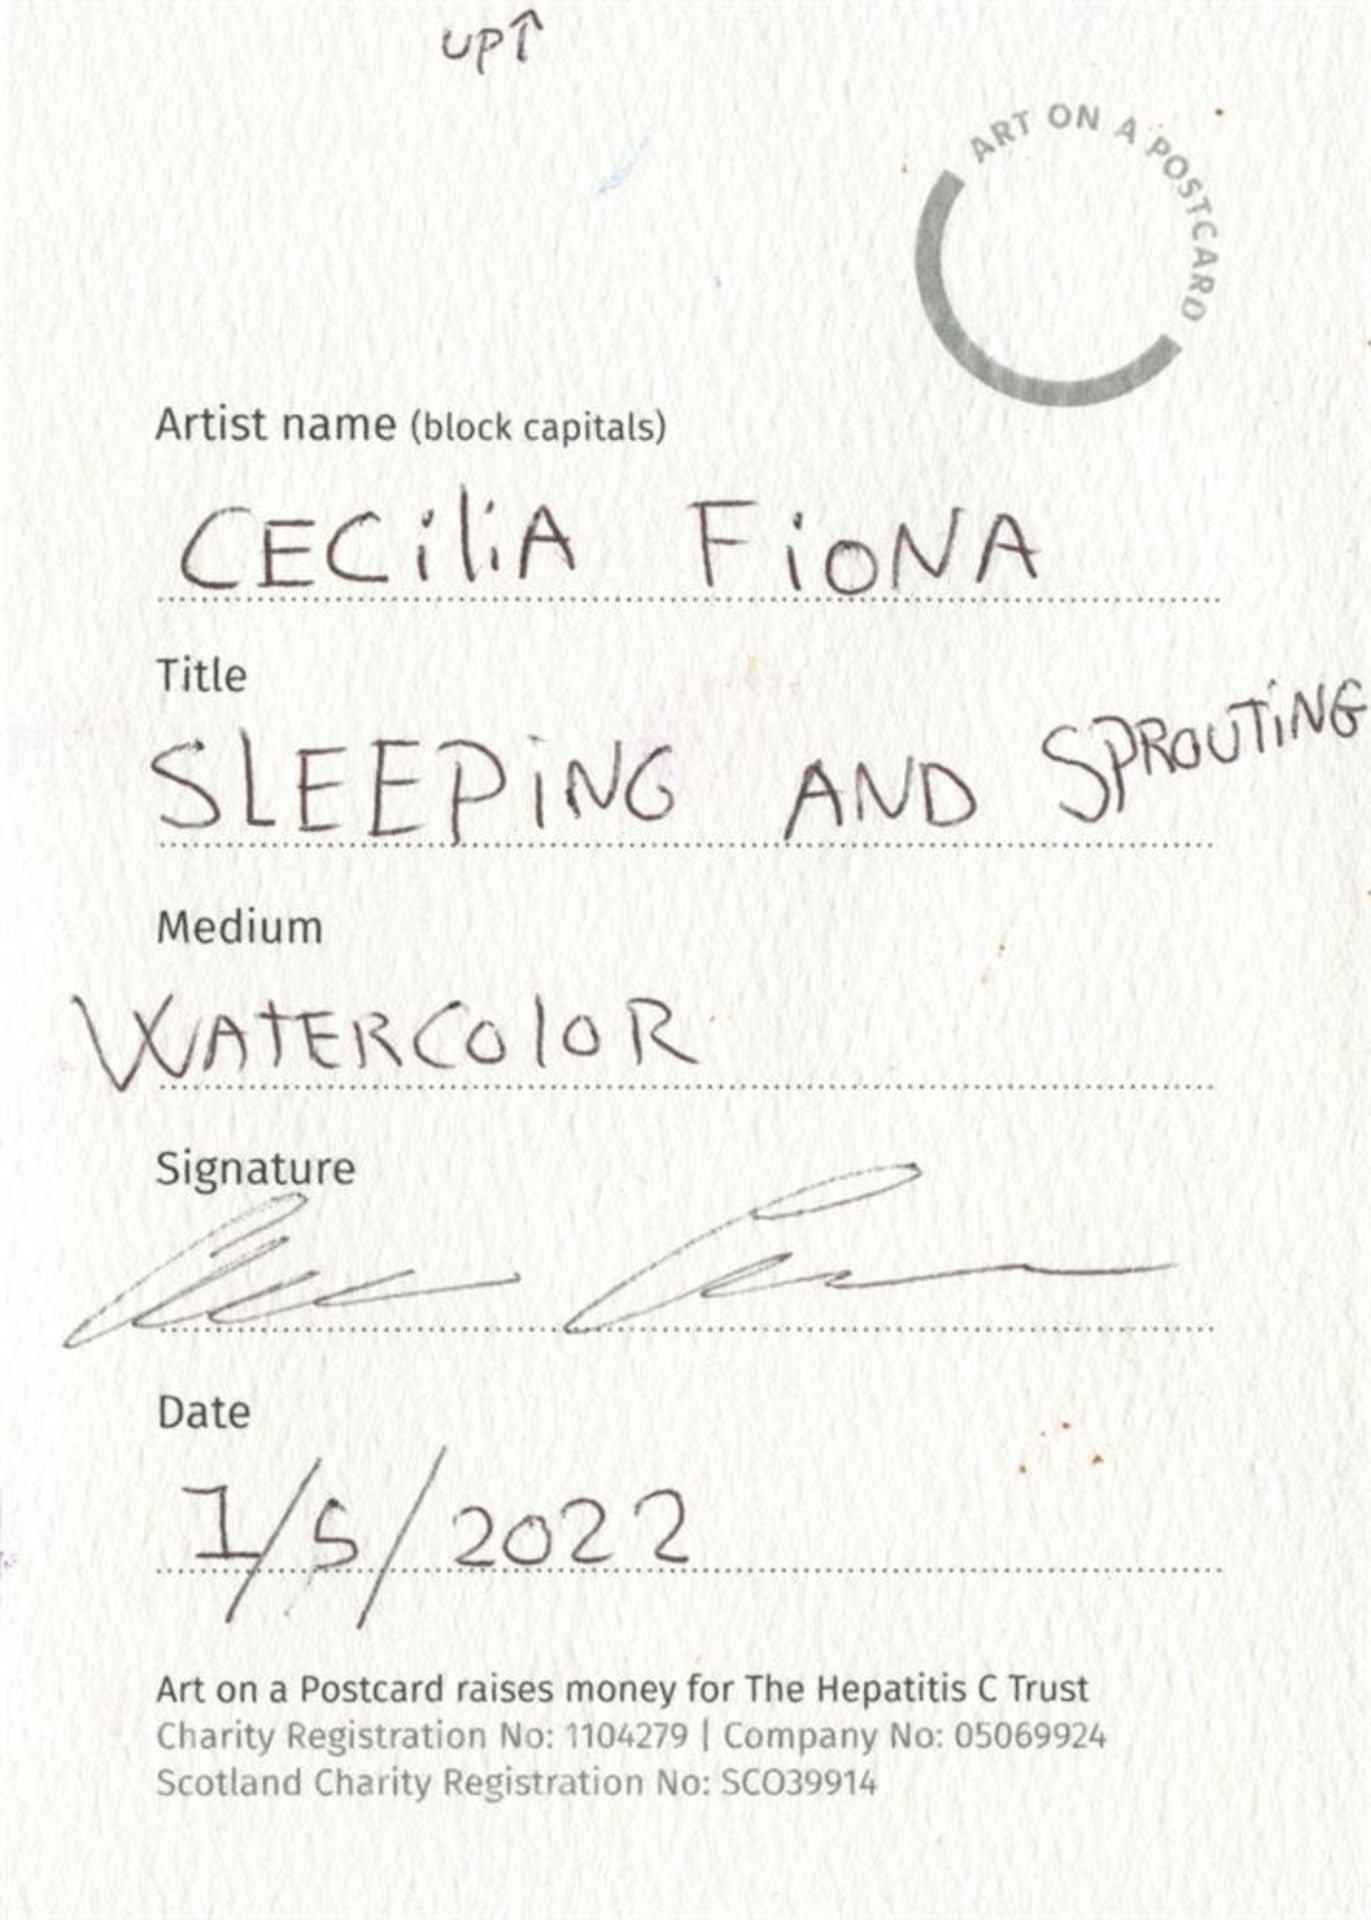 Cecilia Fiona, Sleeping and Sprouting, 2022 - Image 2 of 3